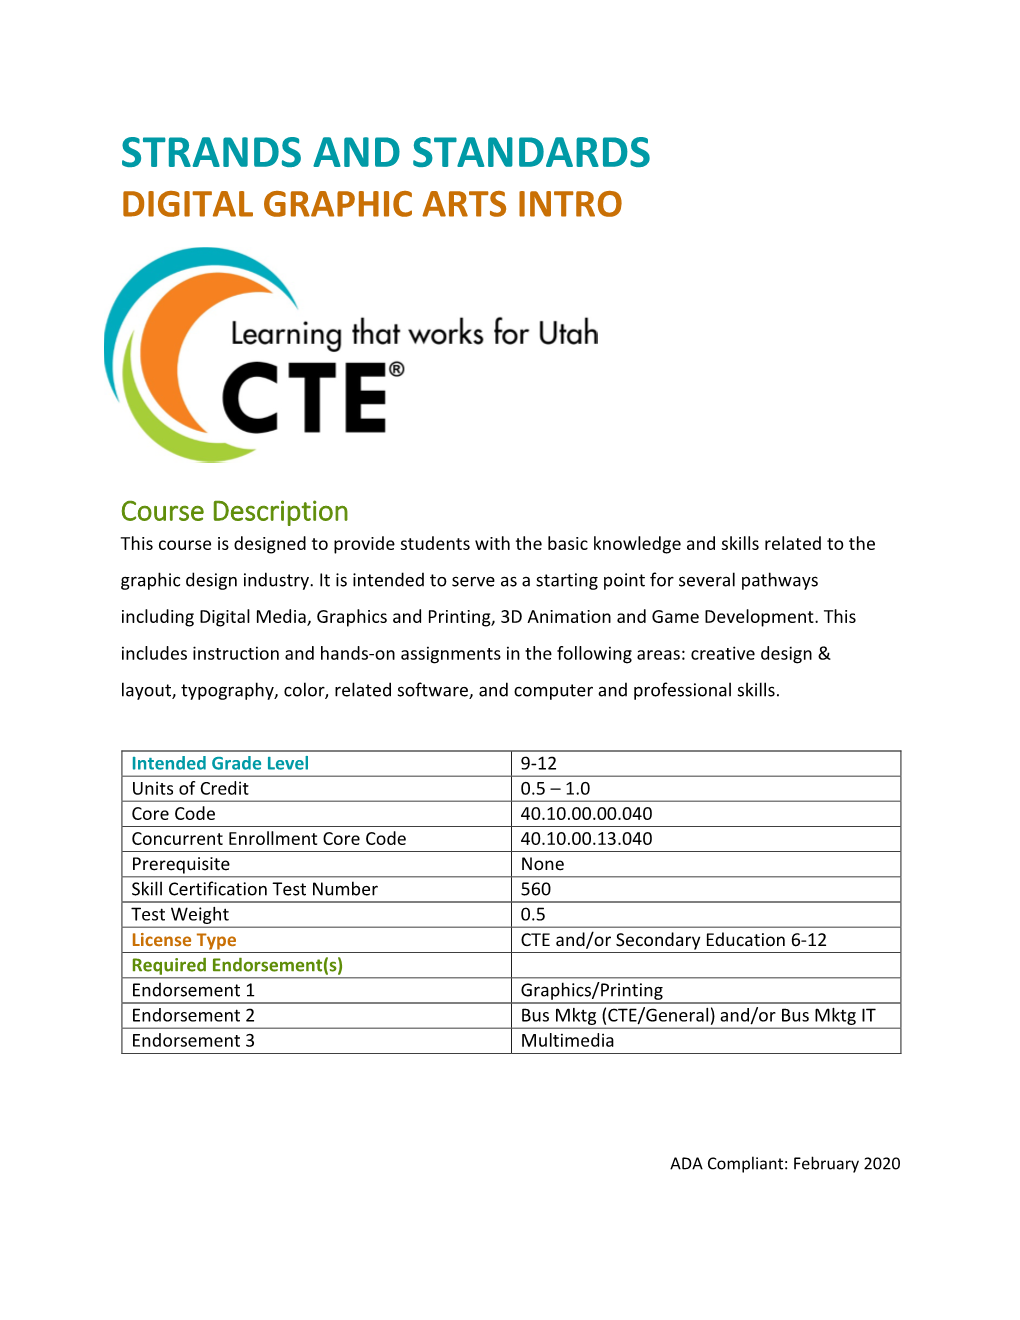 Strands and Standards Digital Graphic Arts Intro